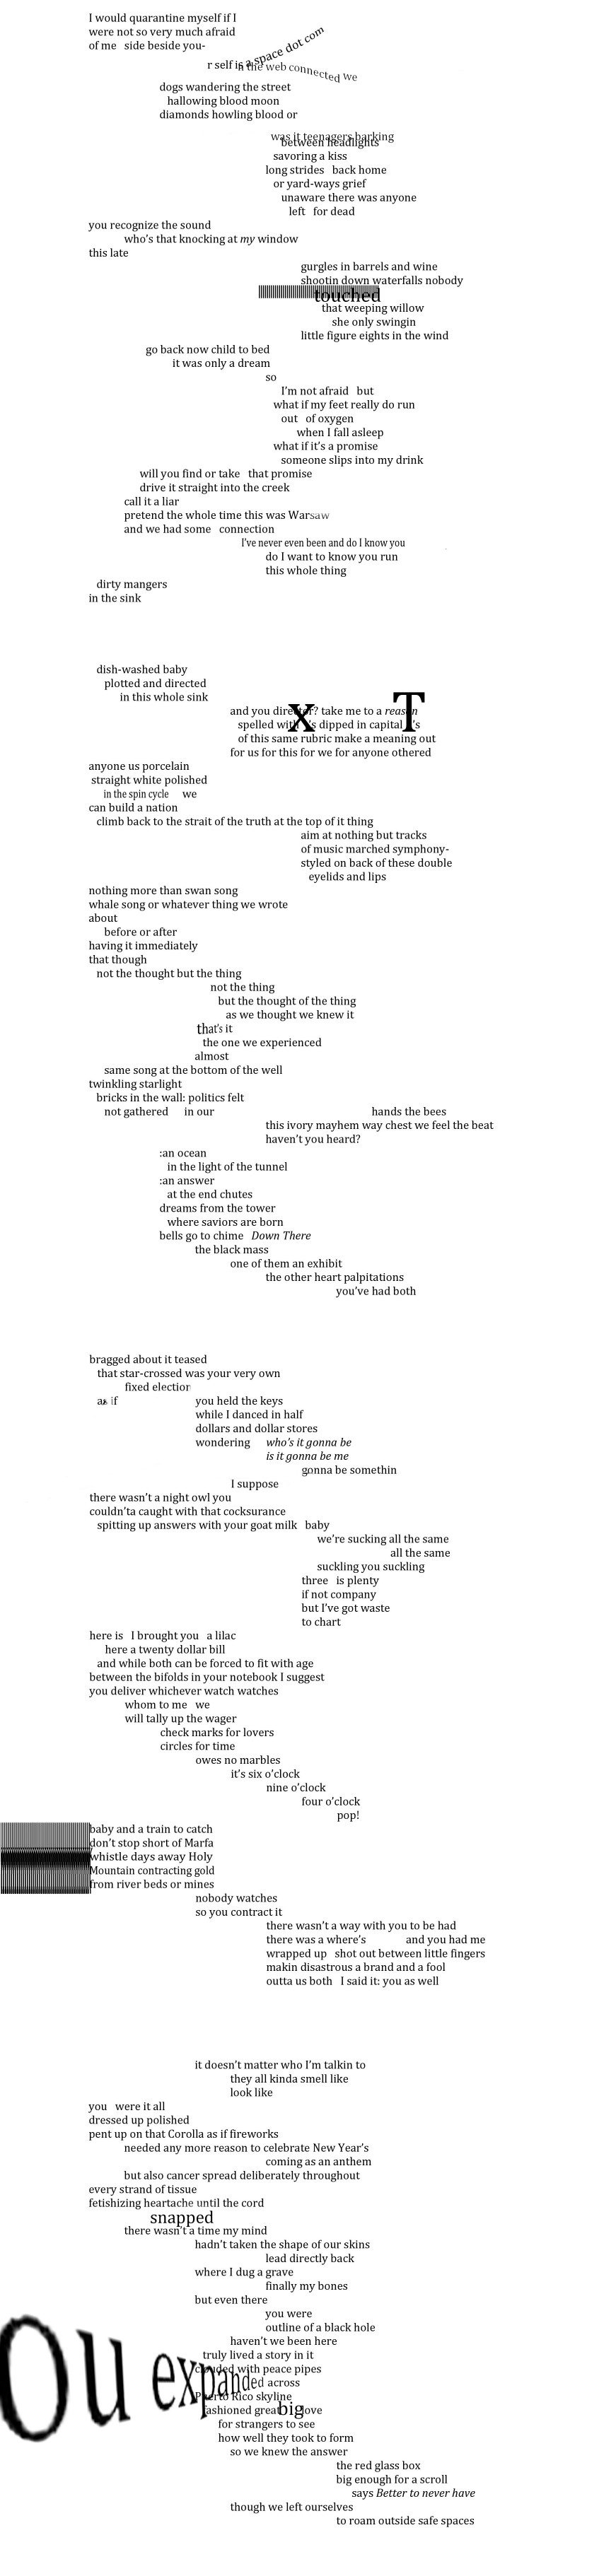 poetry with specially formatted text by Zach Linge